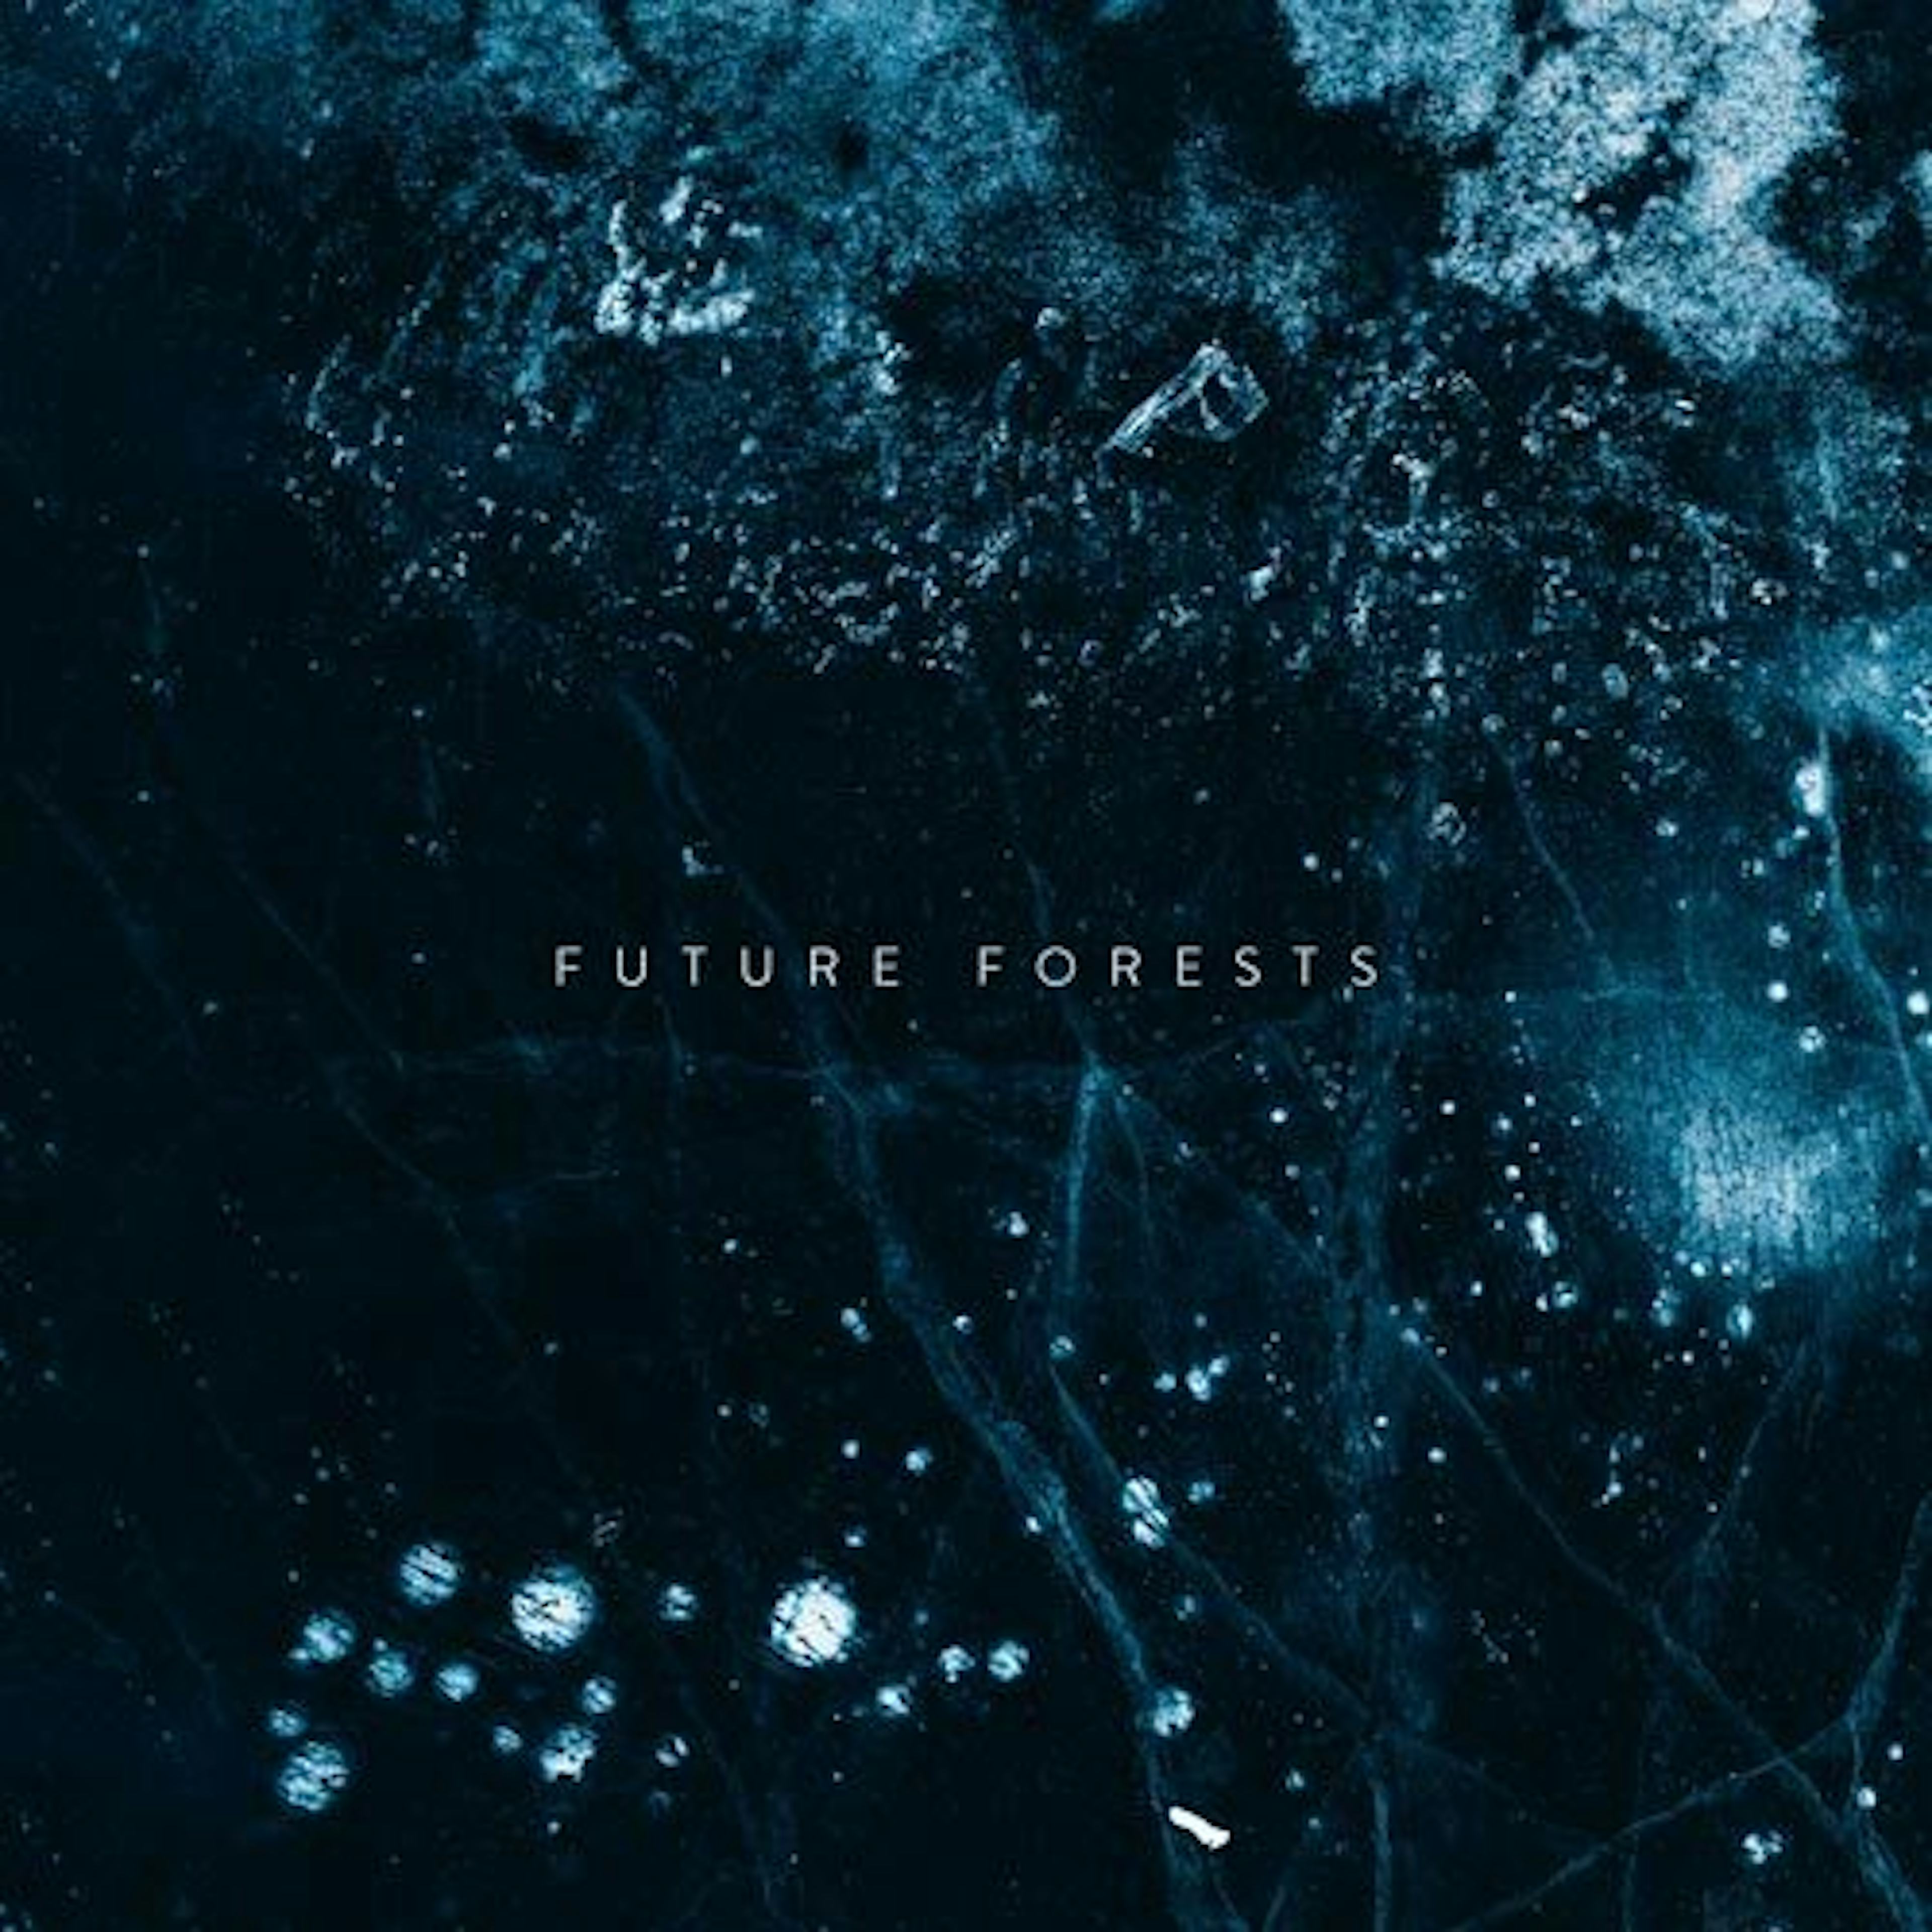 Future Forests artwork